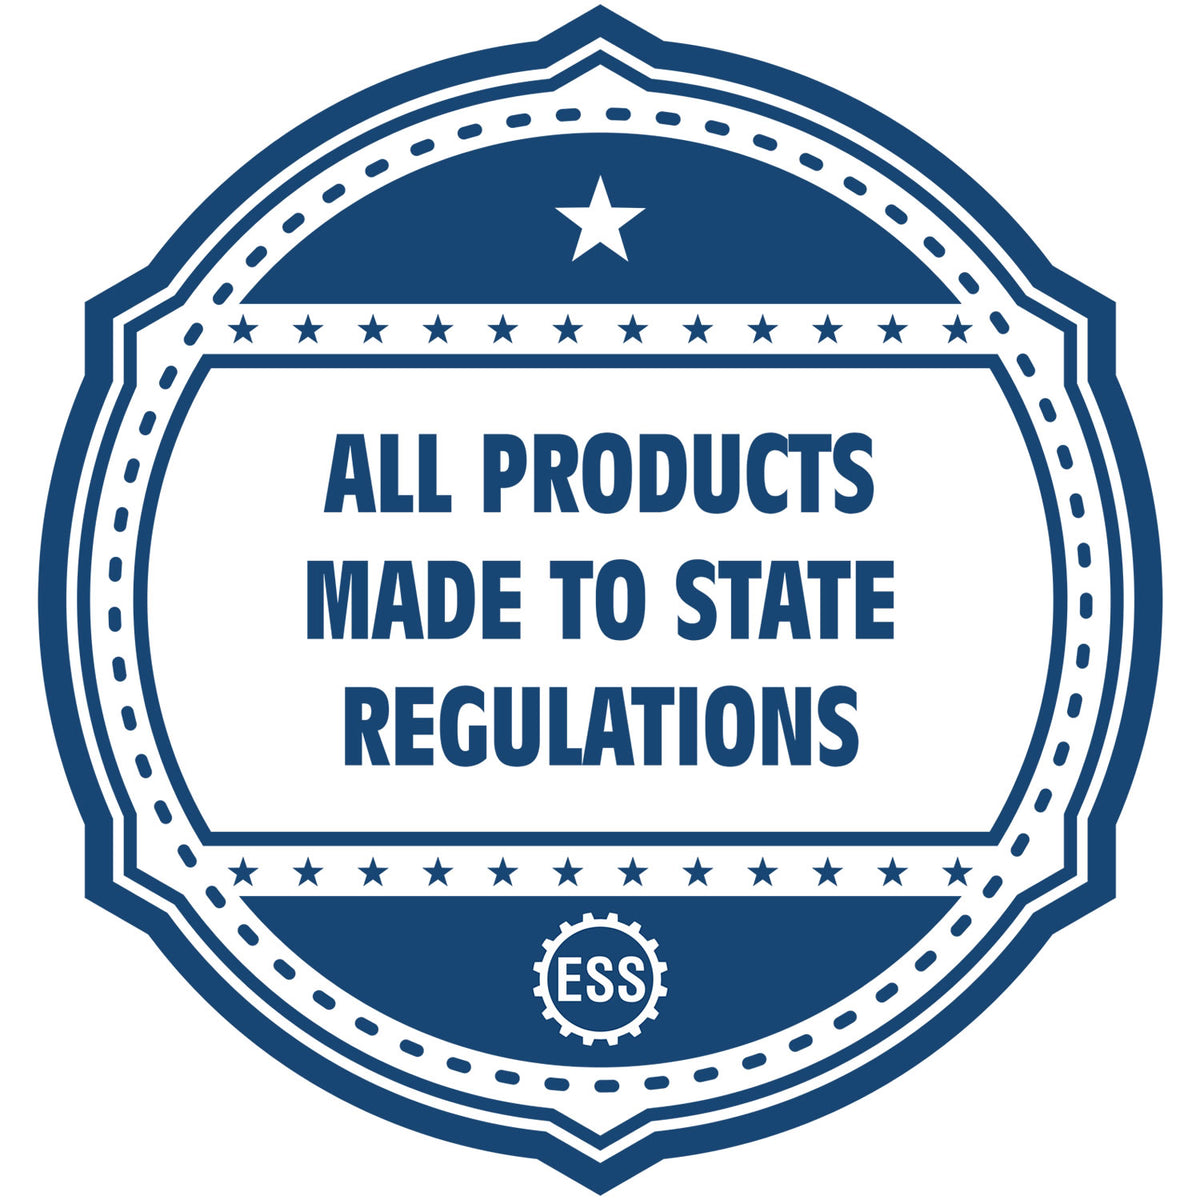 An icon or badge element for the State of New Jersey Extended Long Reach Engineer Seal showing that this product is made in compliance with state regulations.